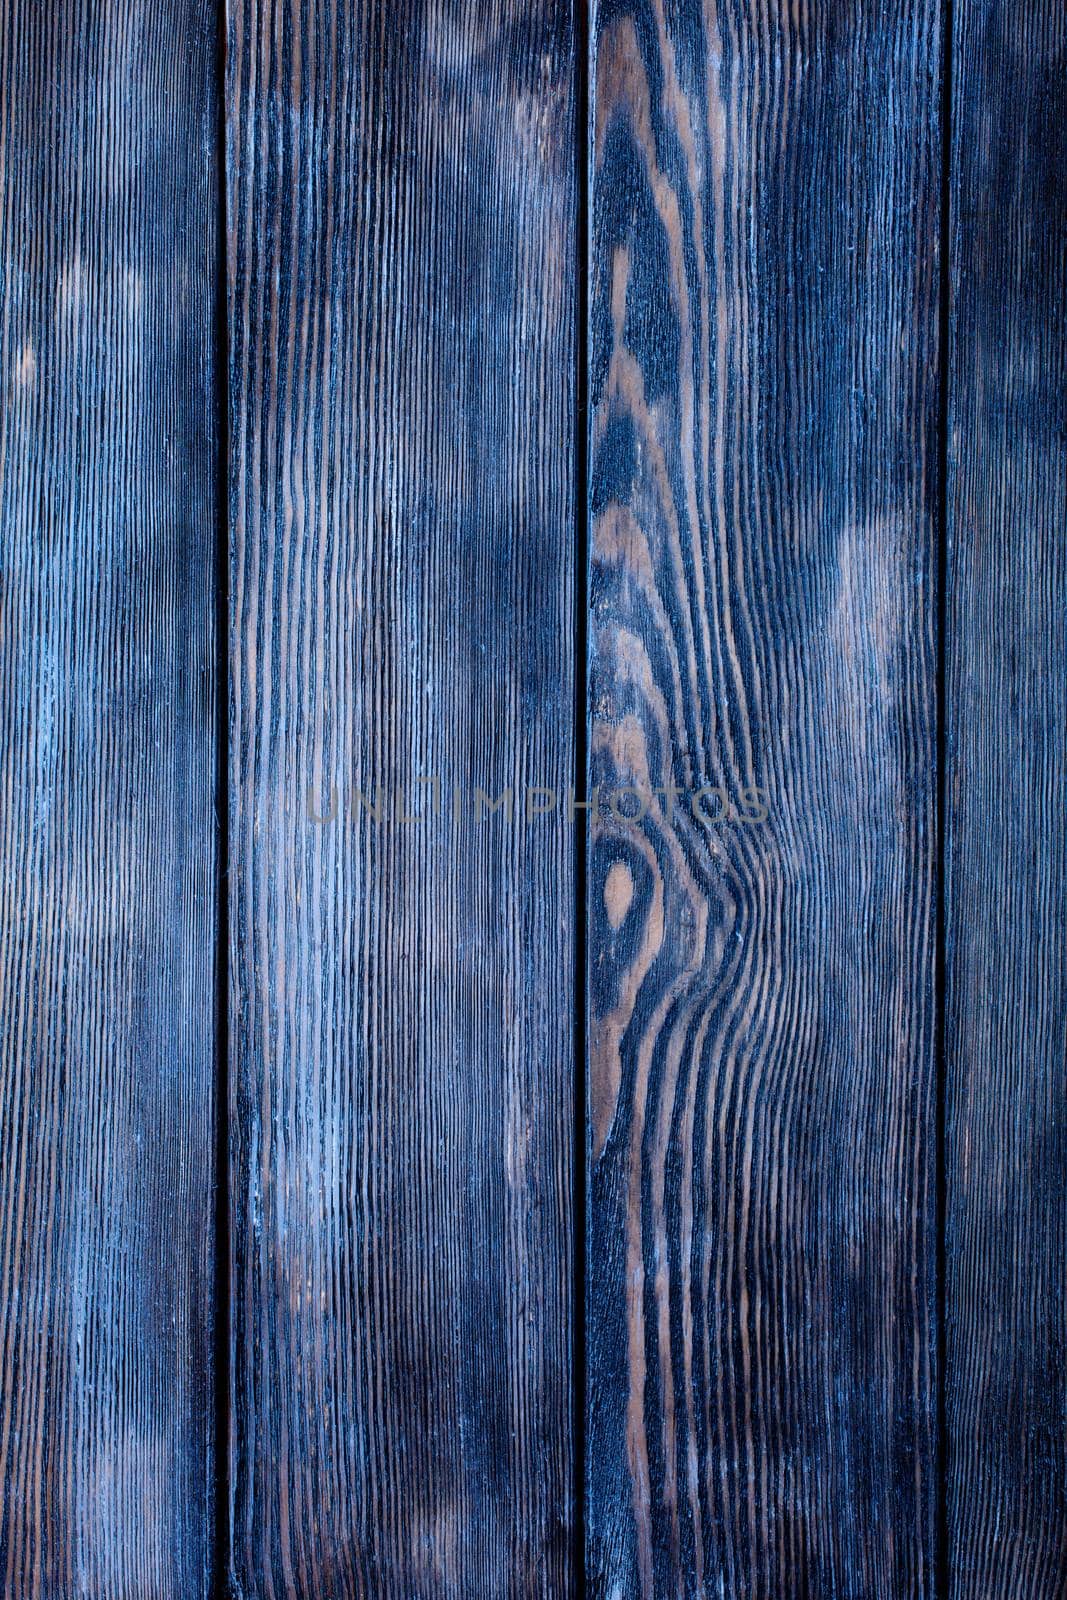 Painted blue wood by oksix